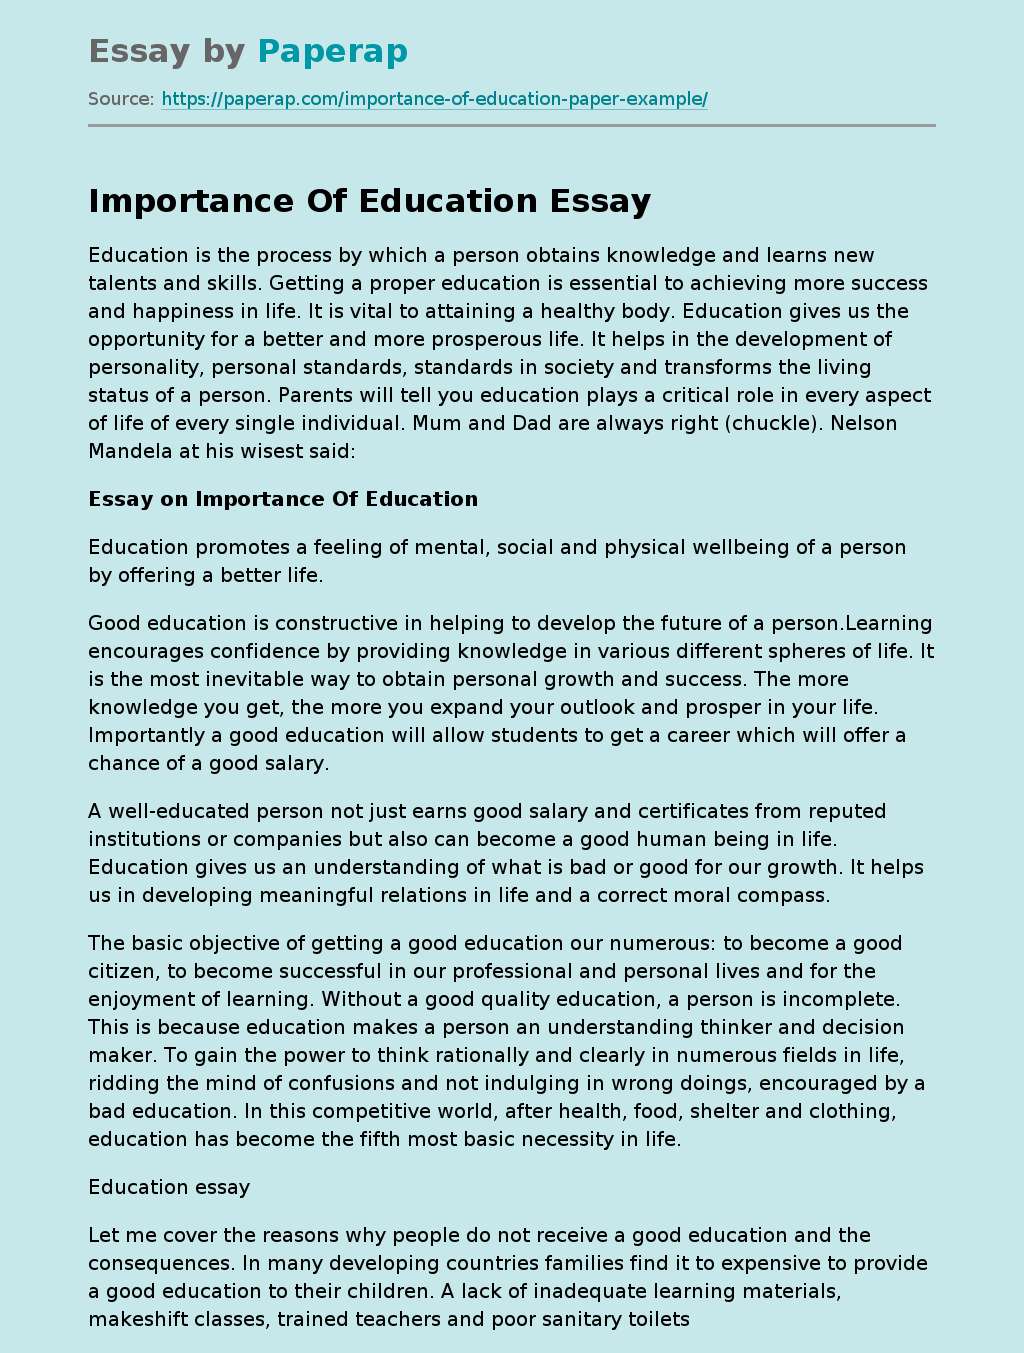 describe the importance of education essay